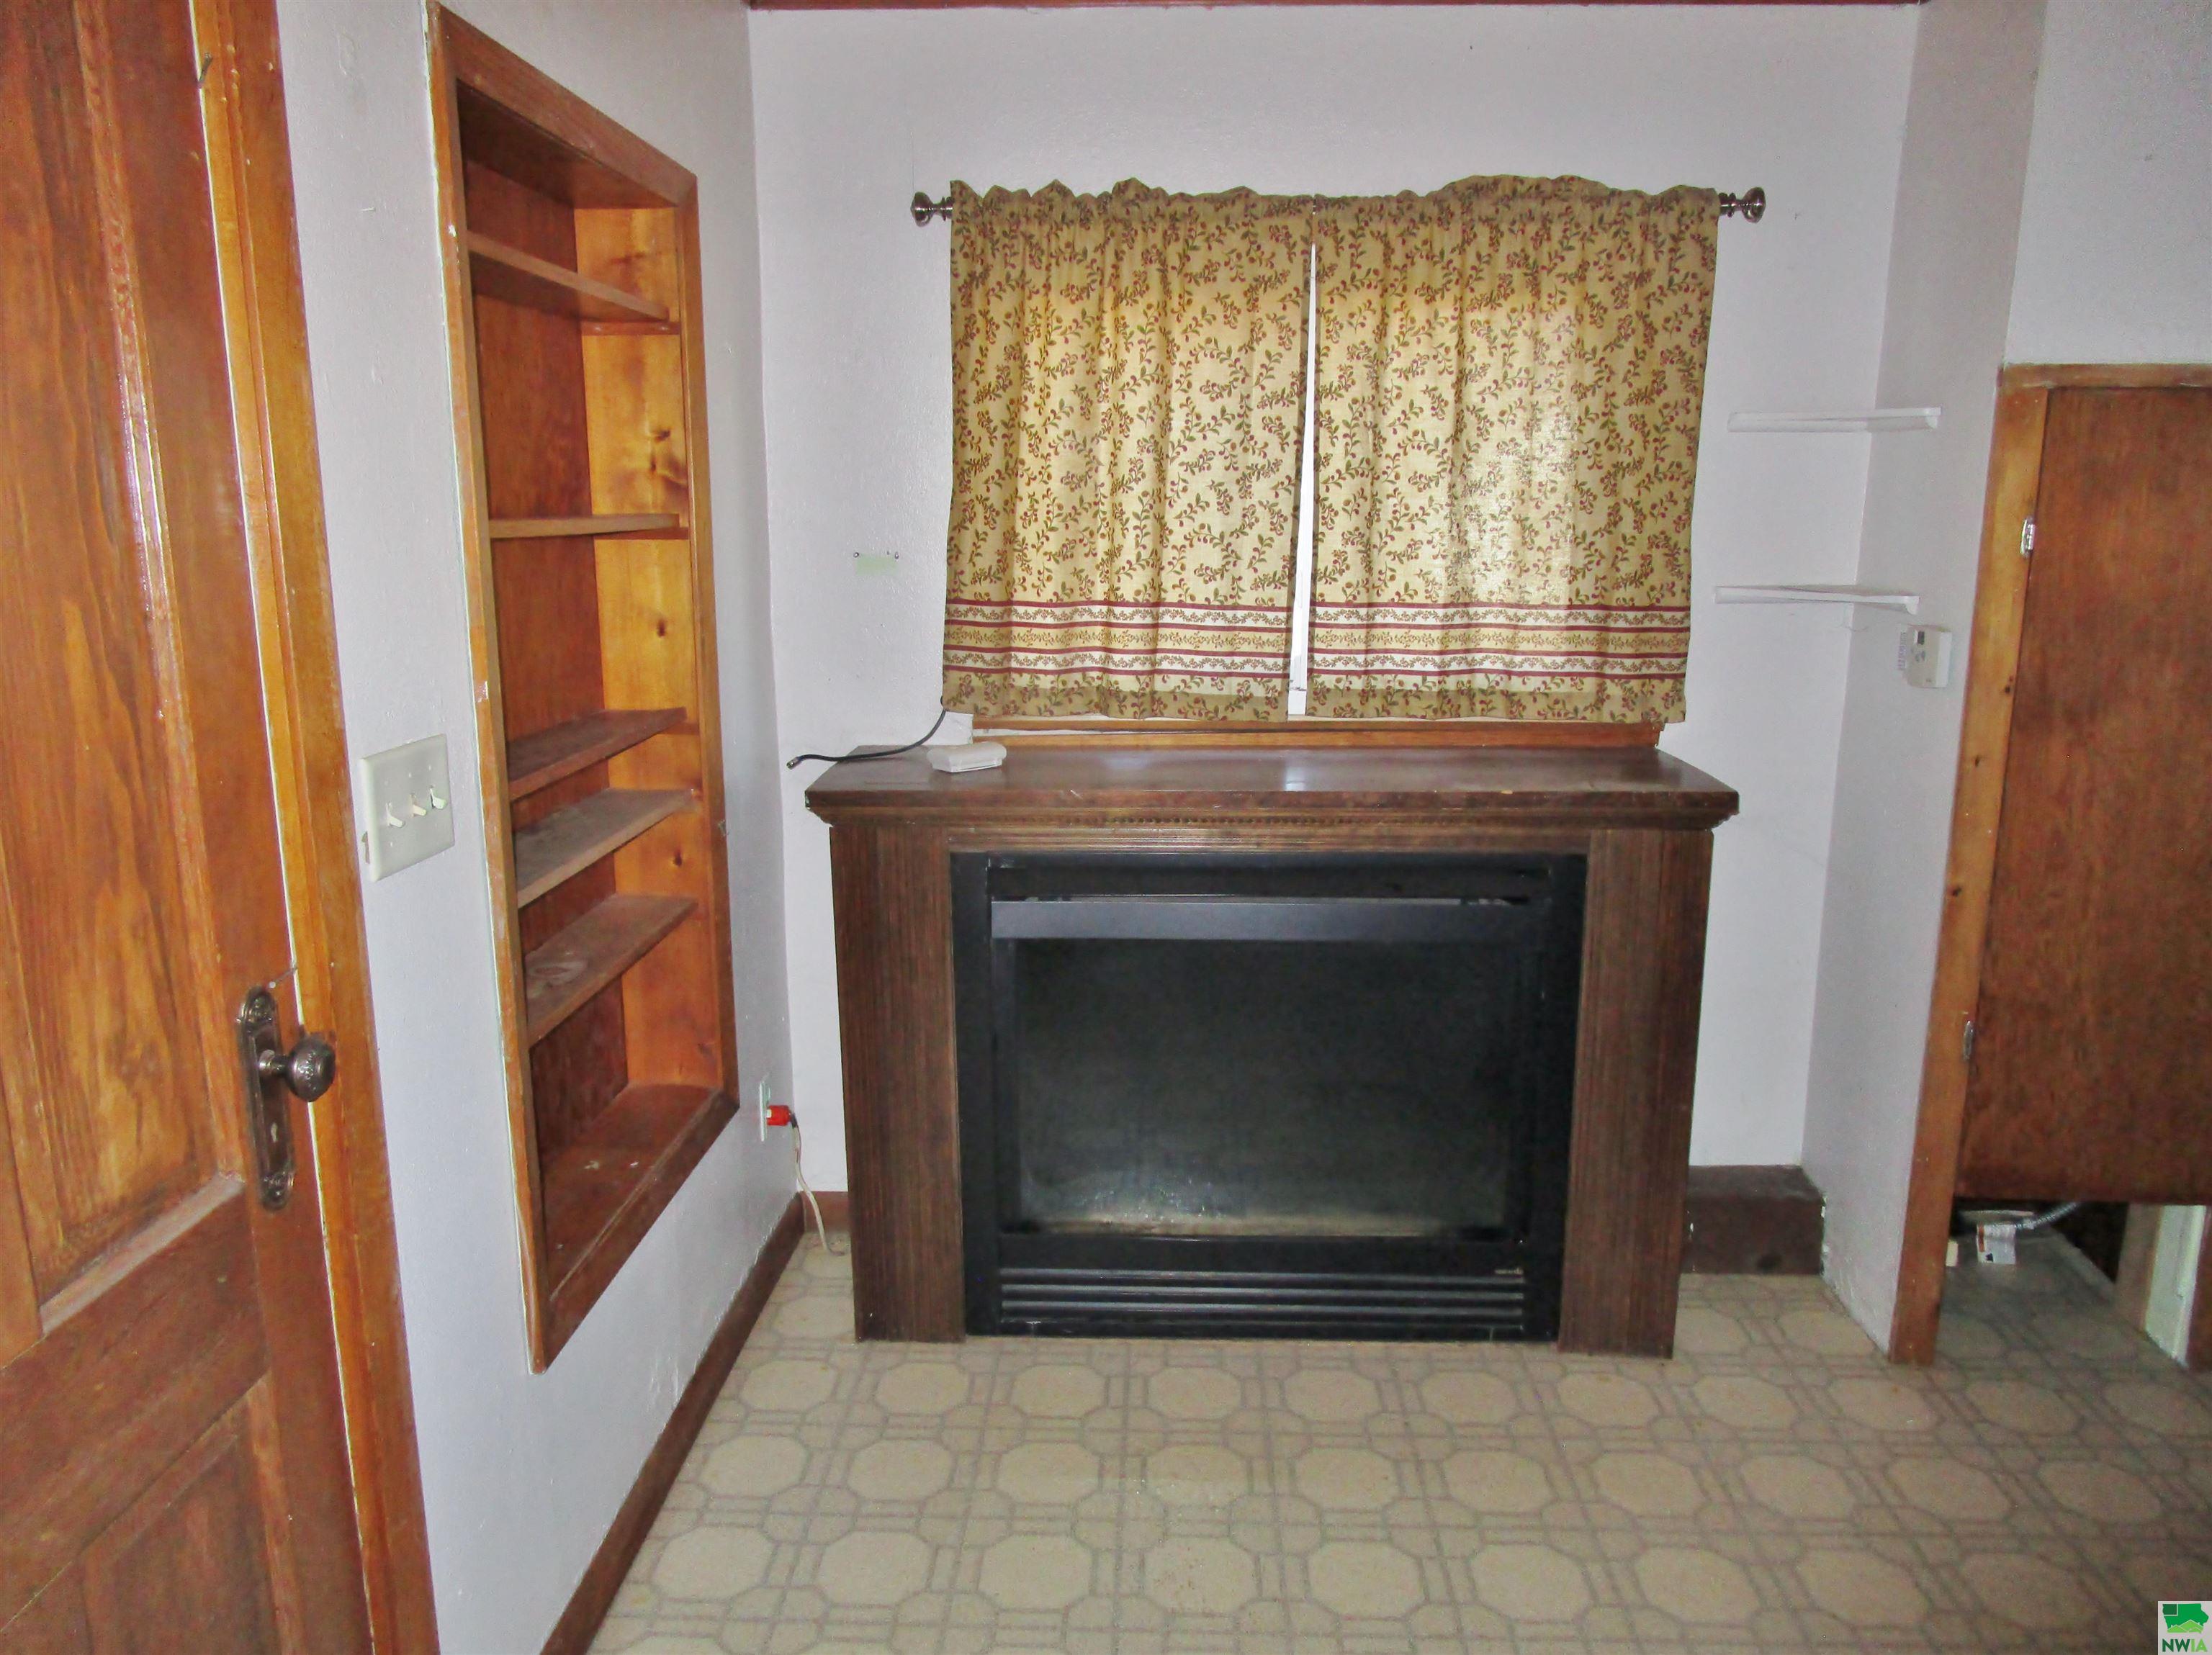 MLS# 823865 for